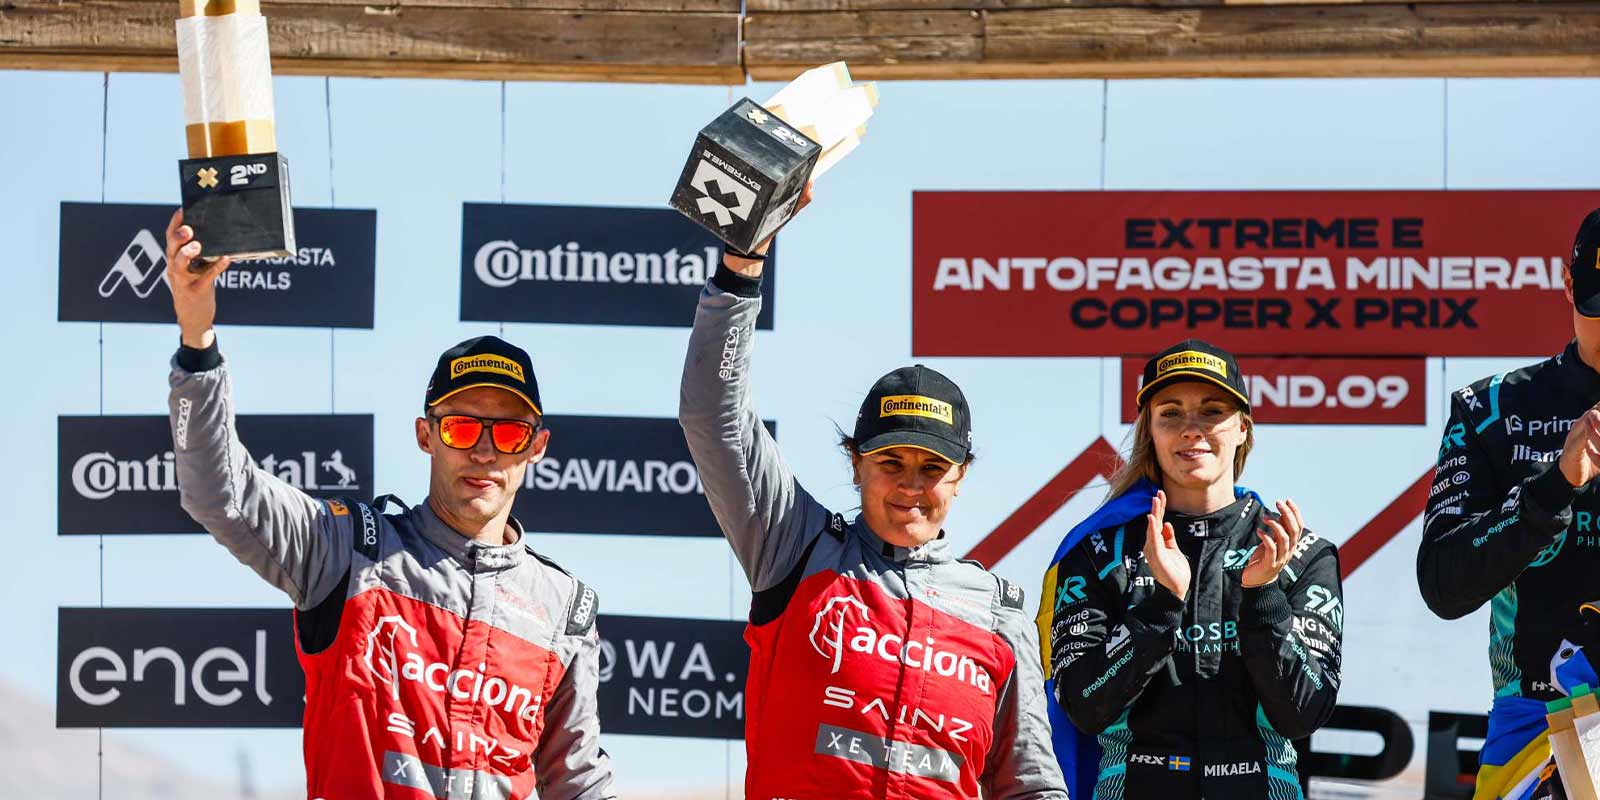 ACCIONA  SAINZ XE Team finishes second in Extreme E due to